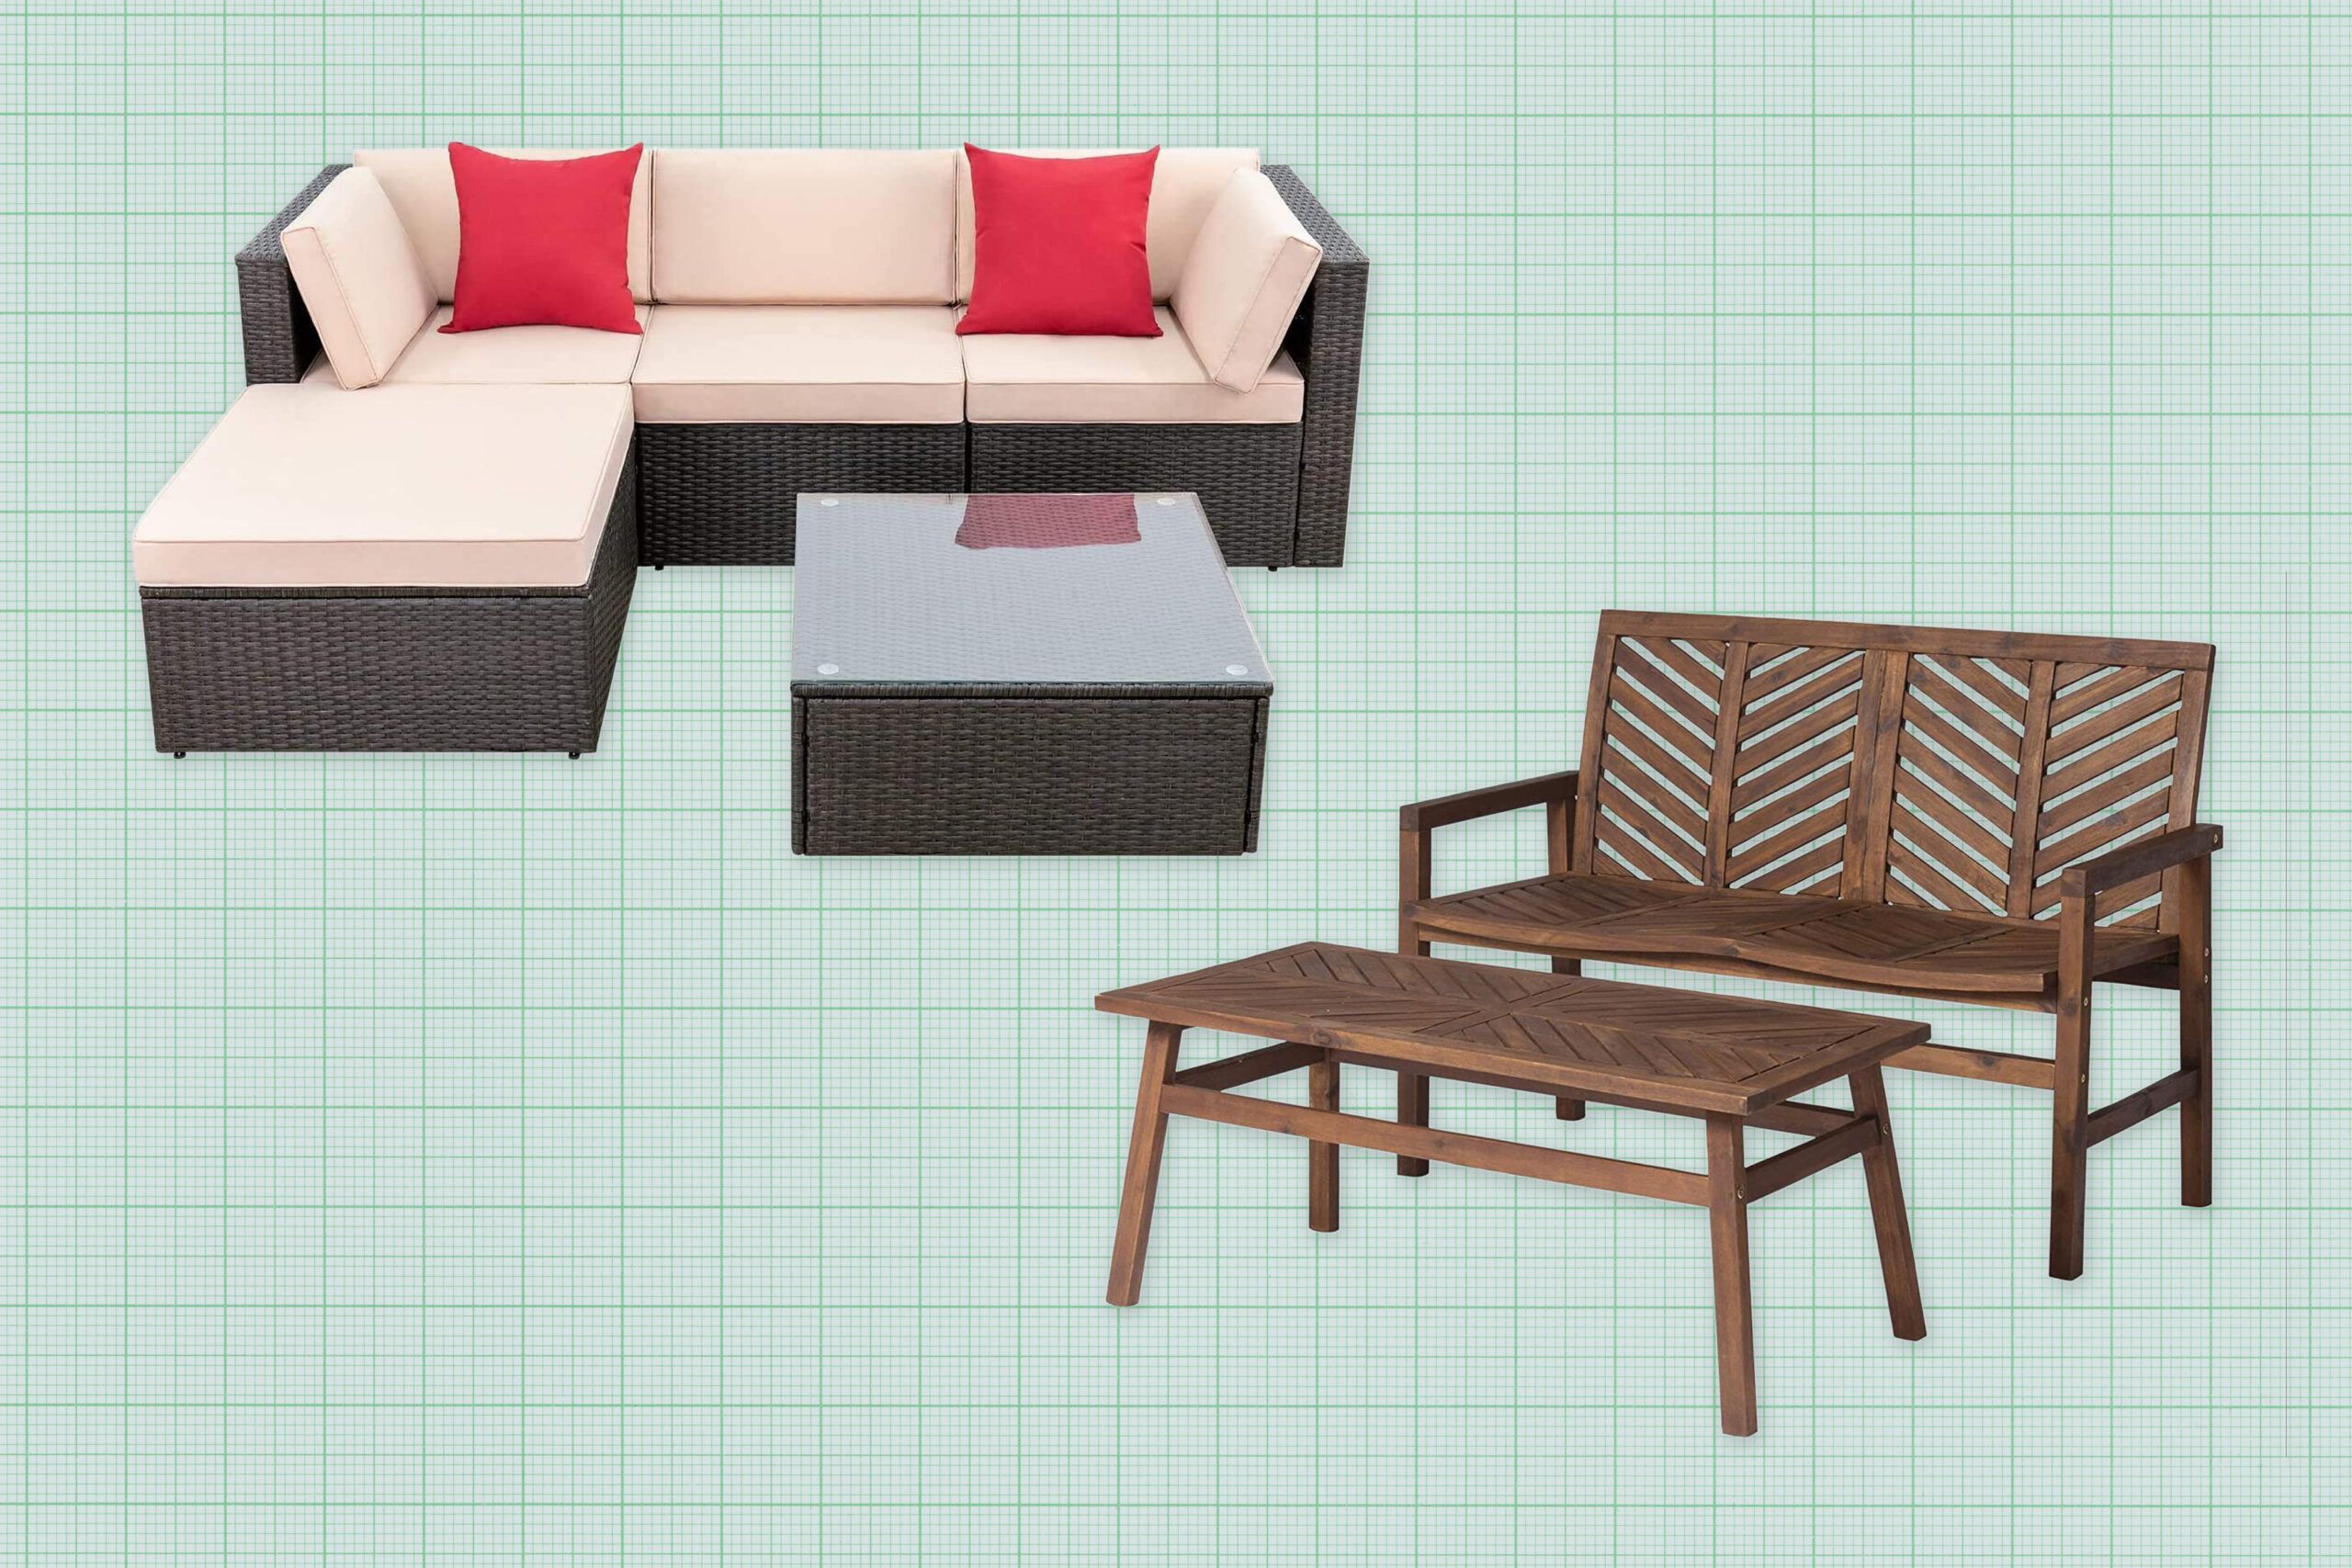 Walker Edison Outdoor Patio Furniture Dining Set and Devoko Patio Furniture Set isolated on a green grid paper background. Lead image for Best Patio Furniture Sets (2023 Guide).